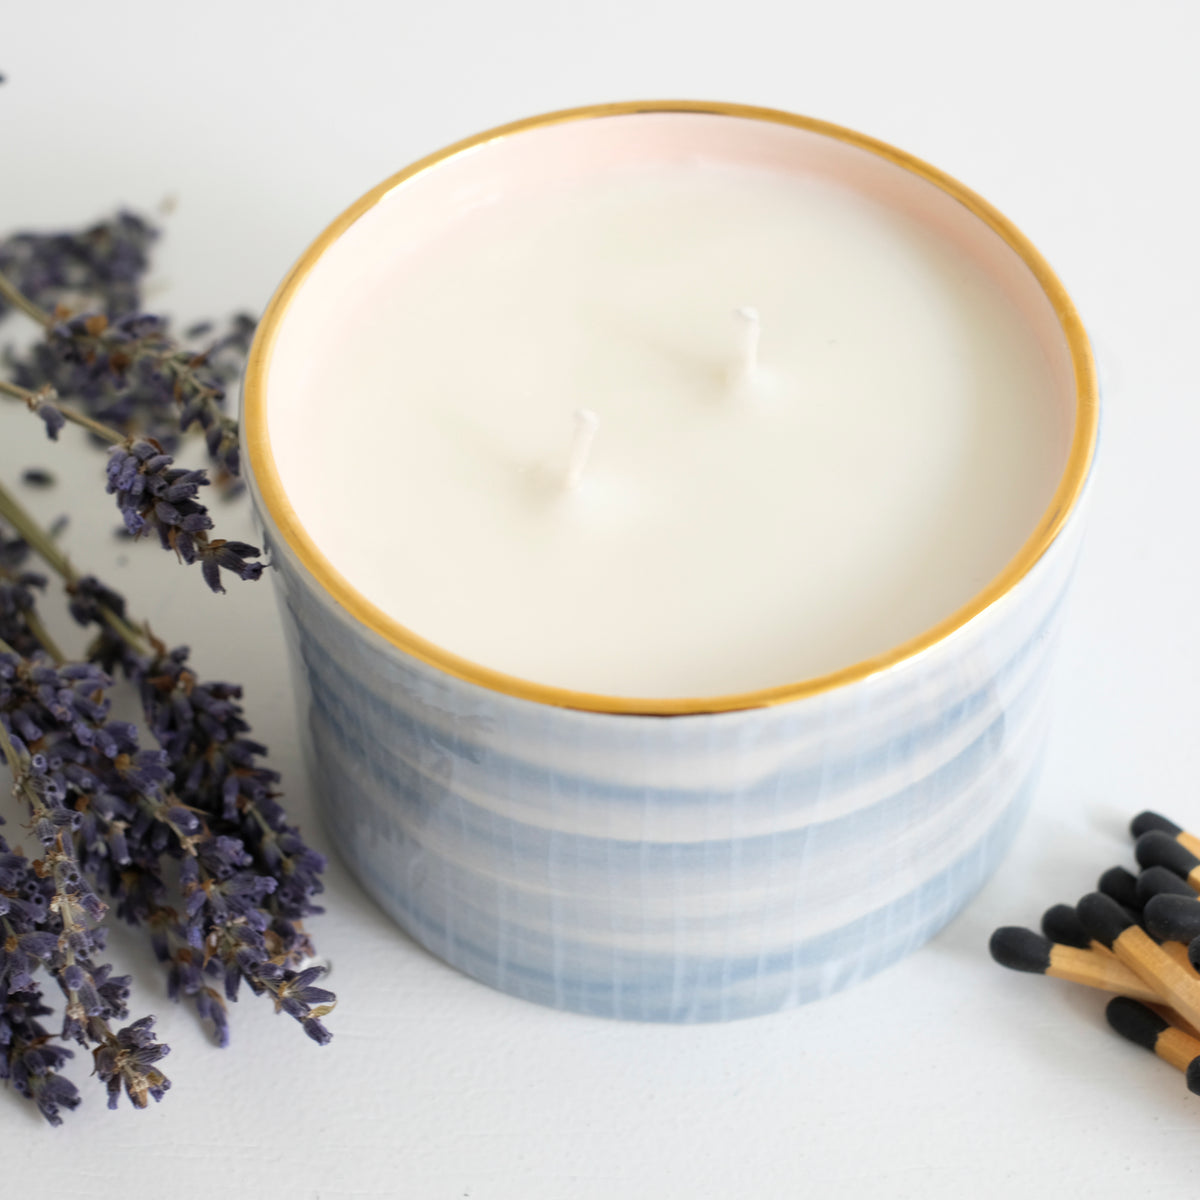 TEAKWOOD + LAVENDER – White Squirrels Candle Company